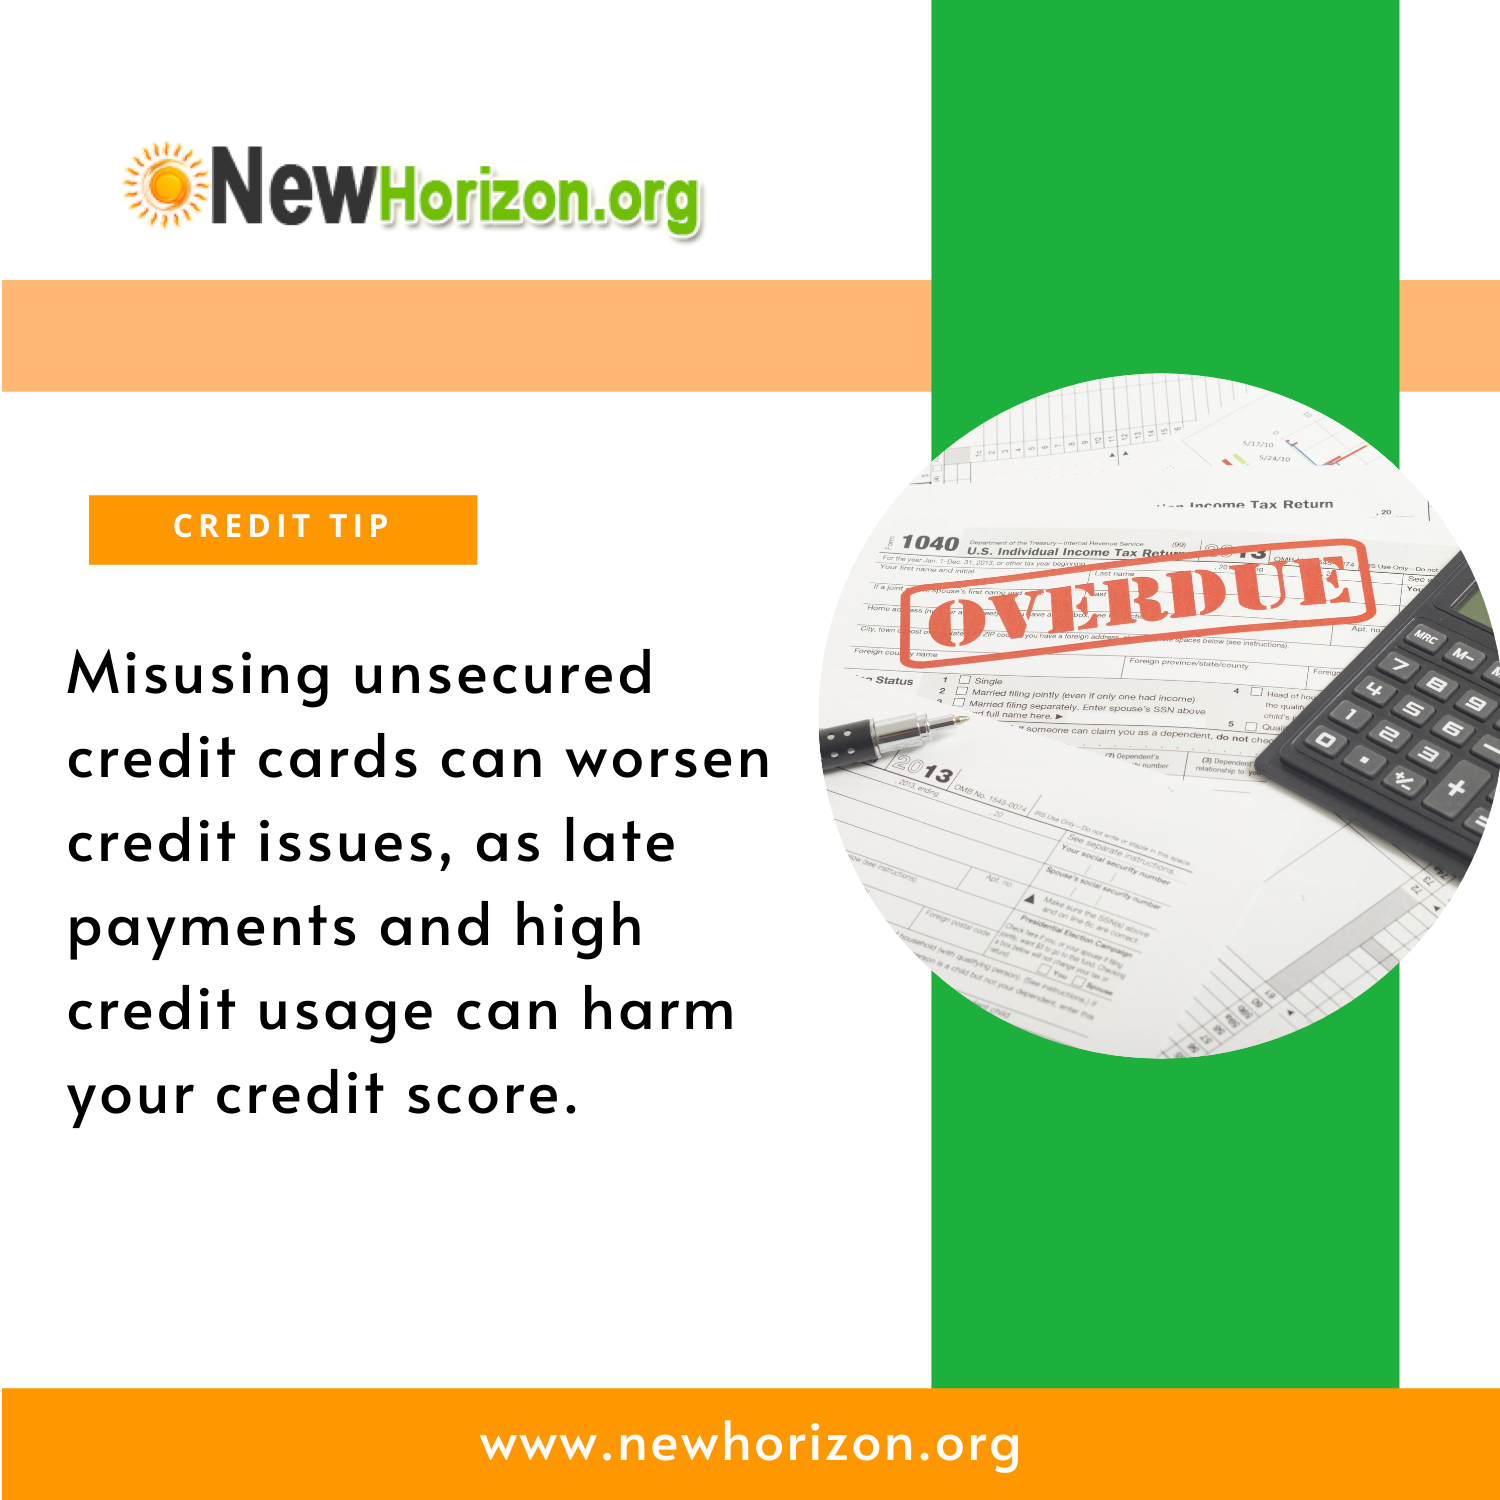 late payments and high credit usage can worsen credit issues